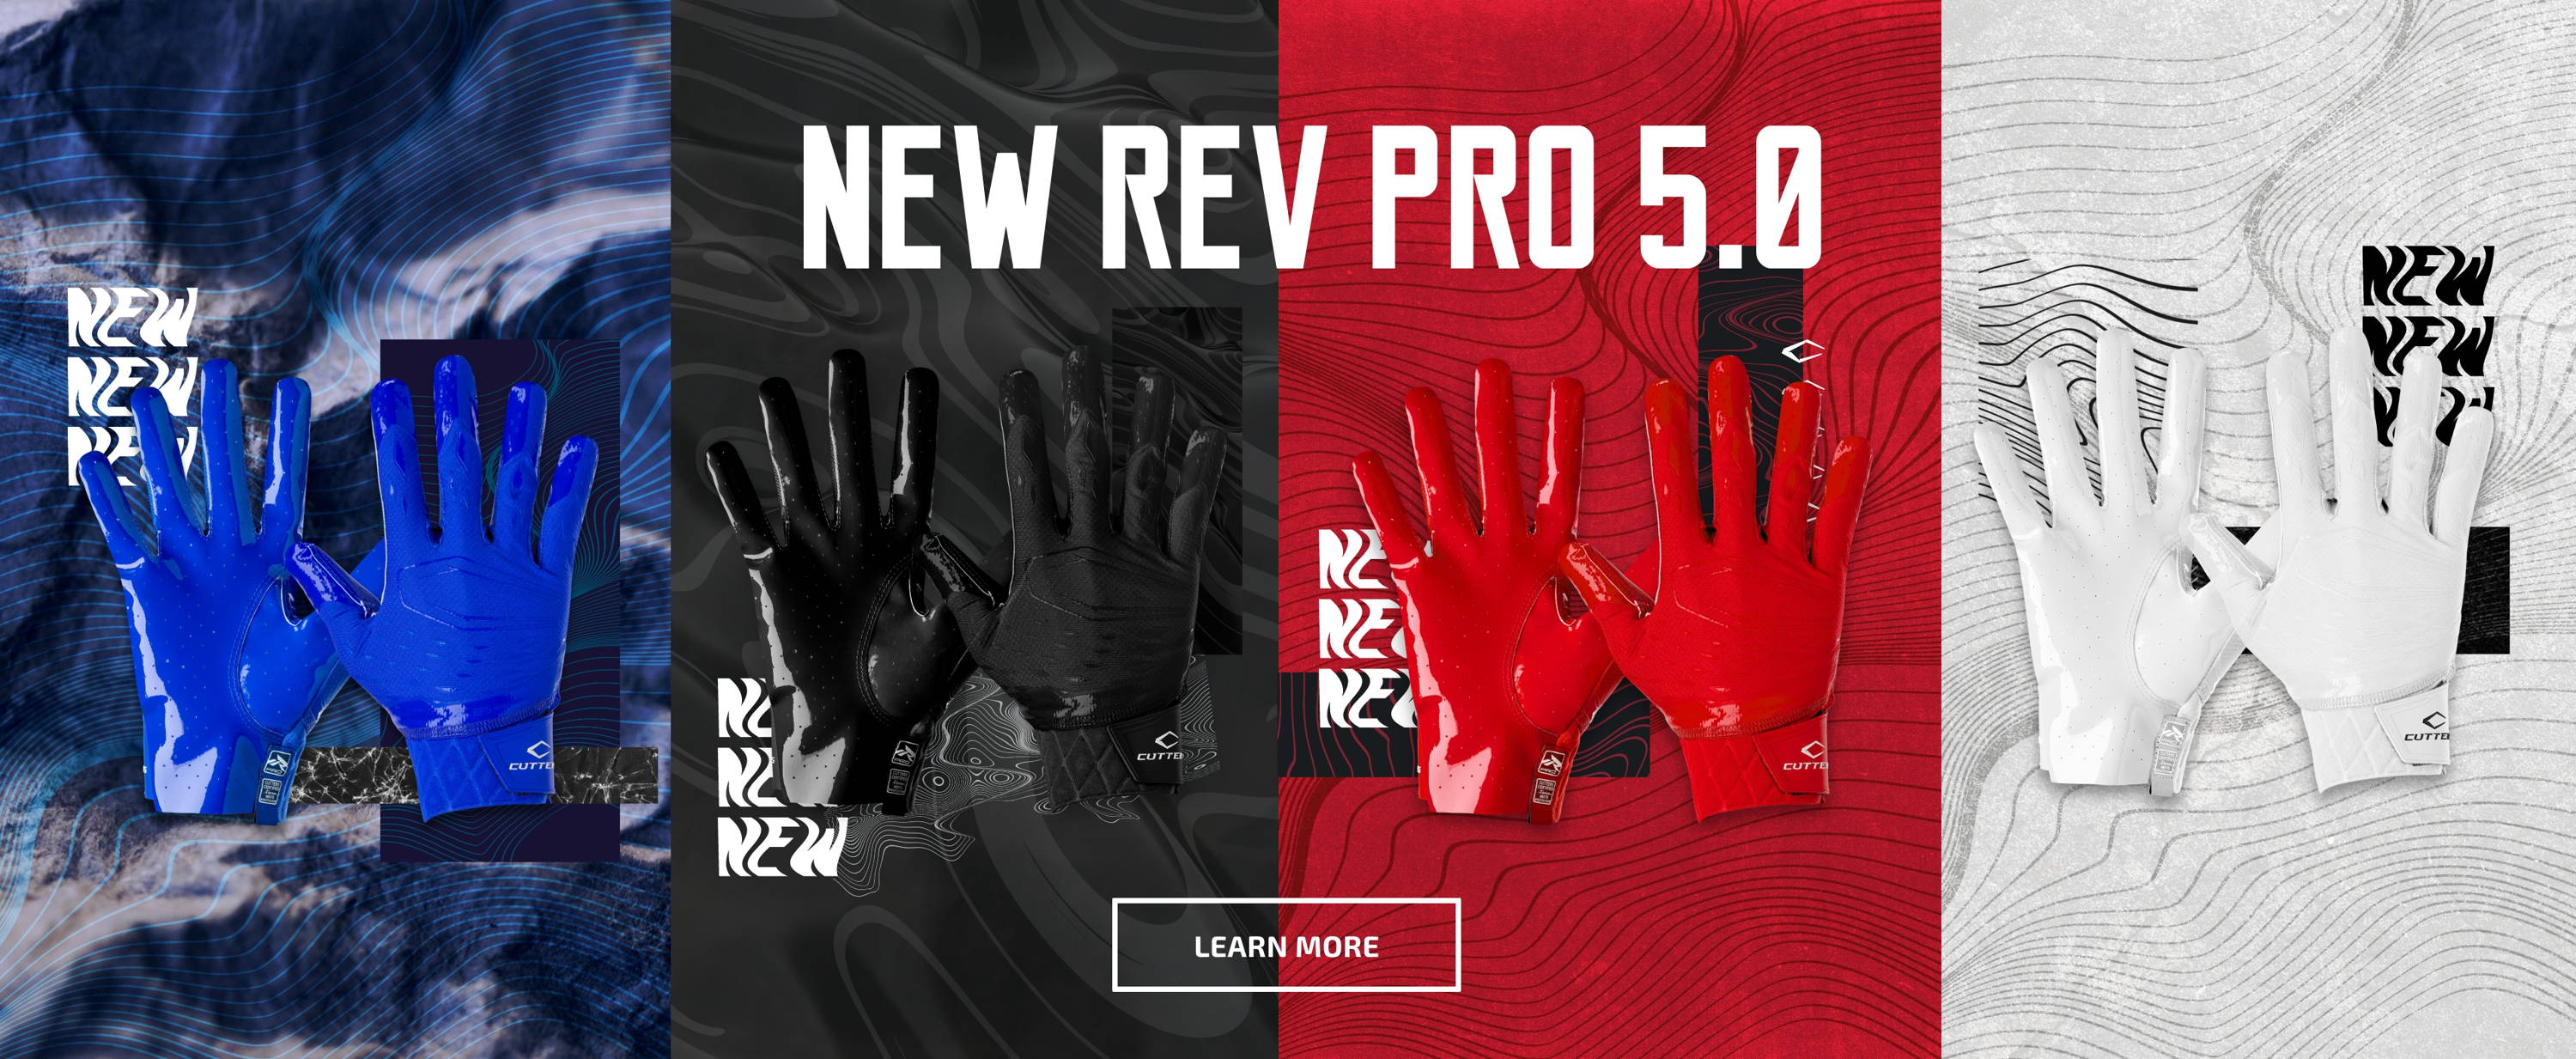 New Rev Pro 5.0 LEARN MORE